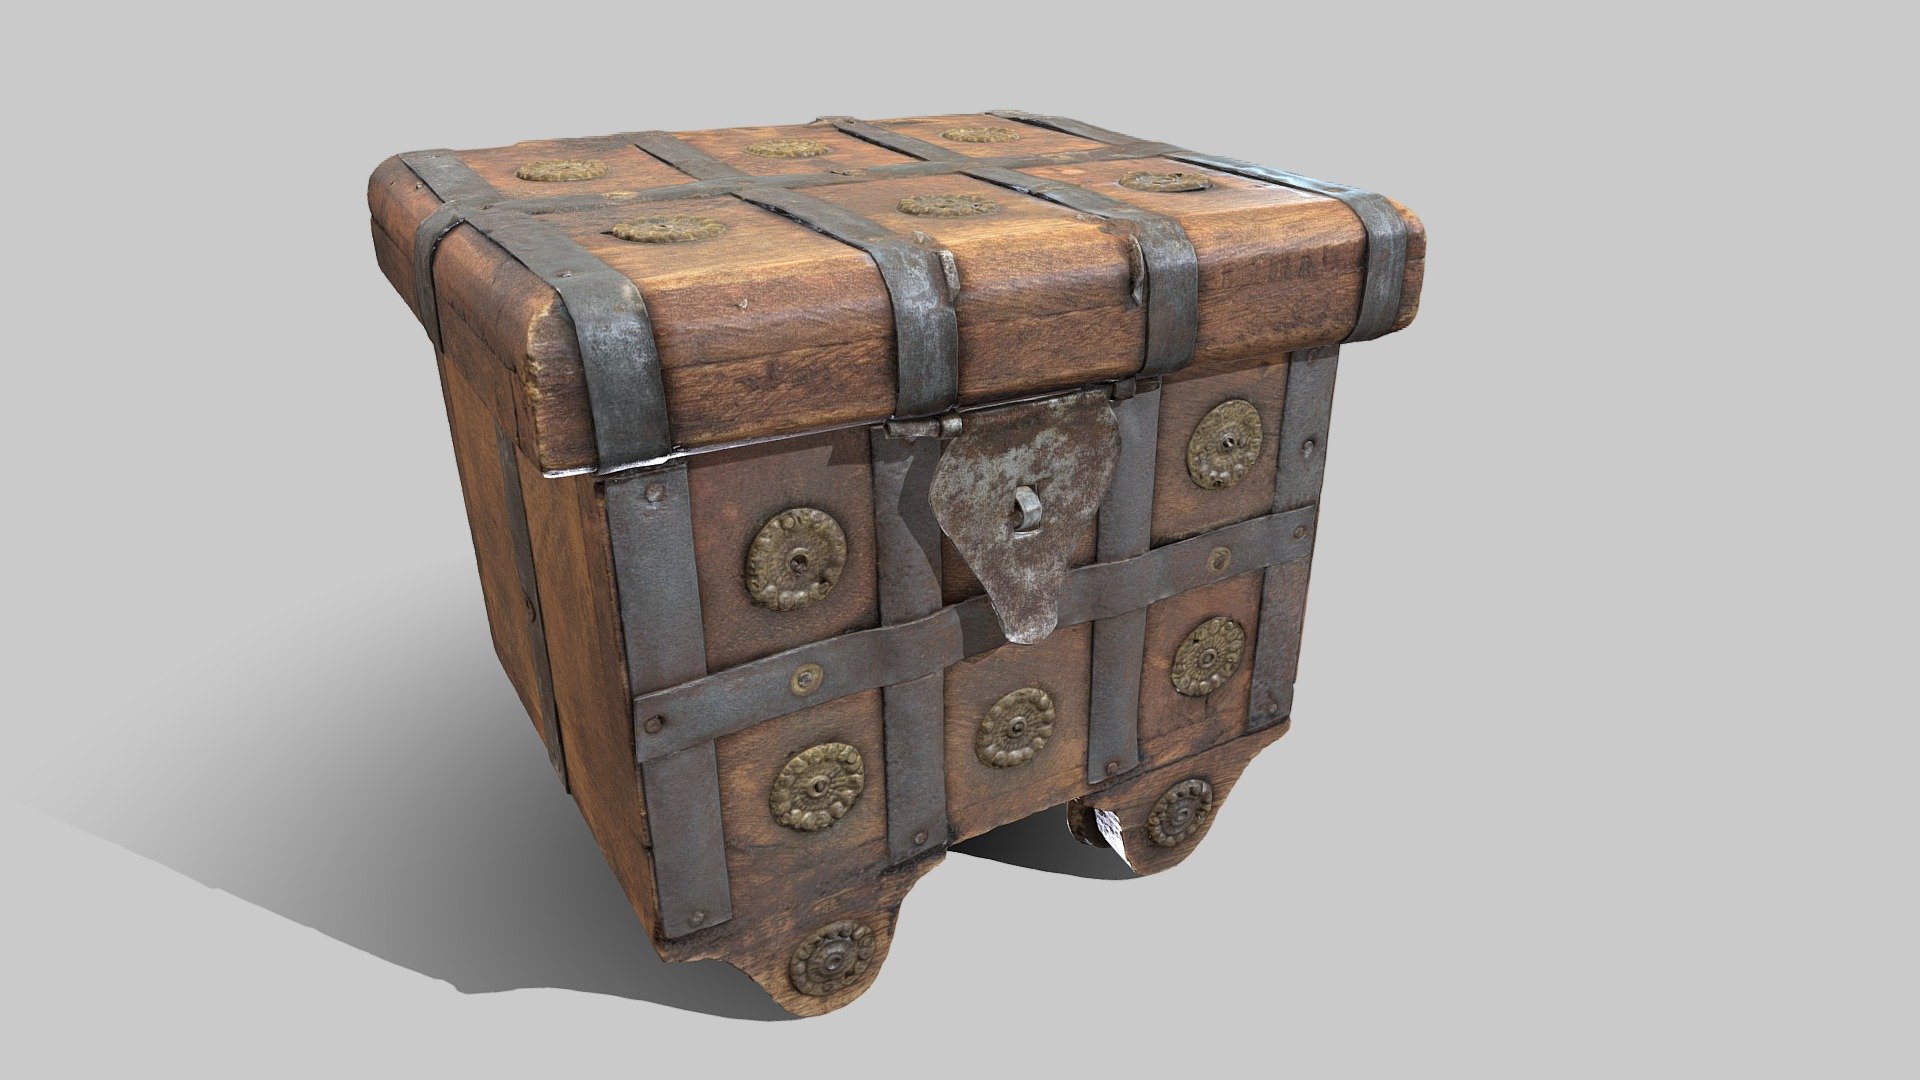 Photogrammetry scan of an ornate wooden box chest with metal straps and decoration. It sits on wooden wheels and includes the interior.

The lid is a separate mesh so that it can be rotated open.

1441 photos taken in a lightbox with a Sony a7R III and processed in Reality Capture.

Animation is to show that chest has complete interior.
Specular maps produced from diffuse using Photoshop and Mudbox.

FBX file.

Textures:
Body: 4k diffuse, 4k spec, 4k normal.
Lid: 2k diffuse, 2k spec, 2k normal.

Meshes (body + lid) total:
120k triangles 3d model